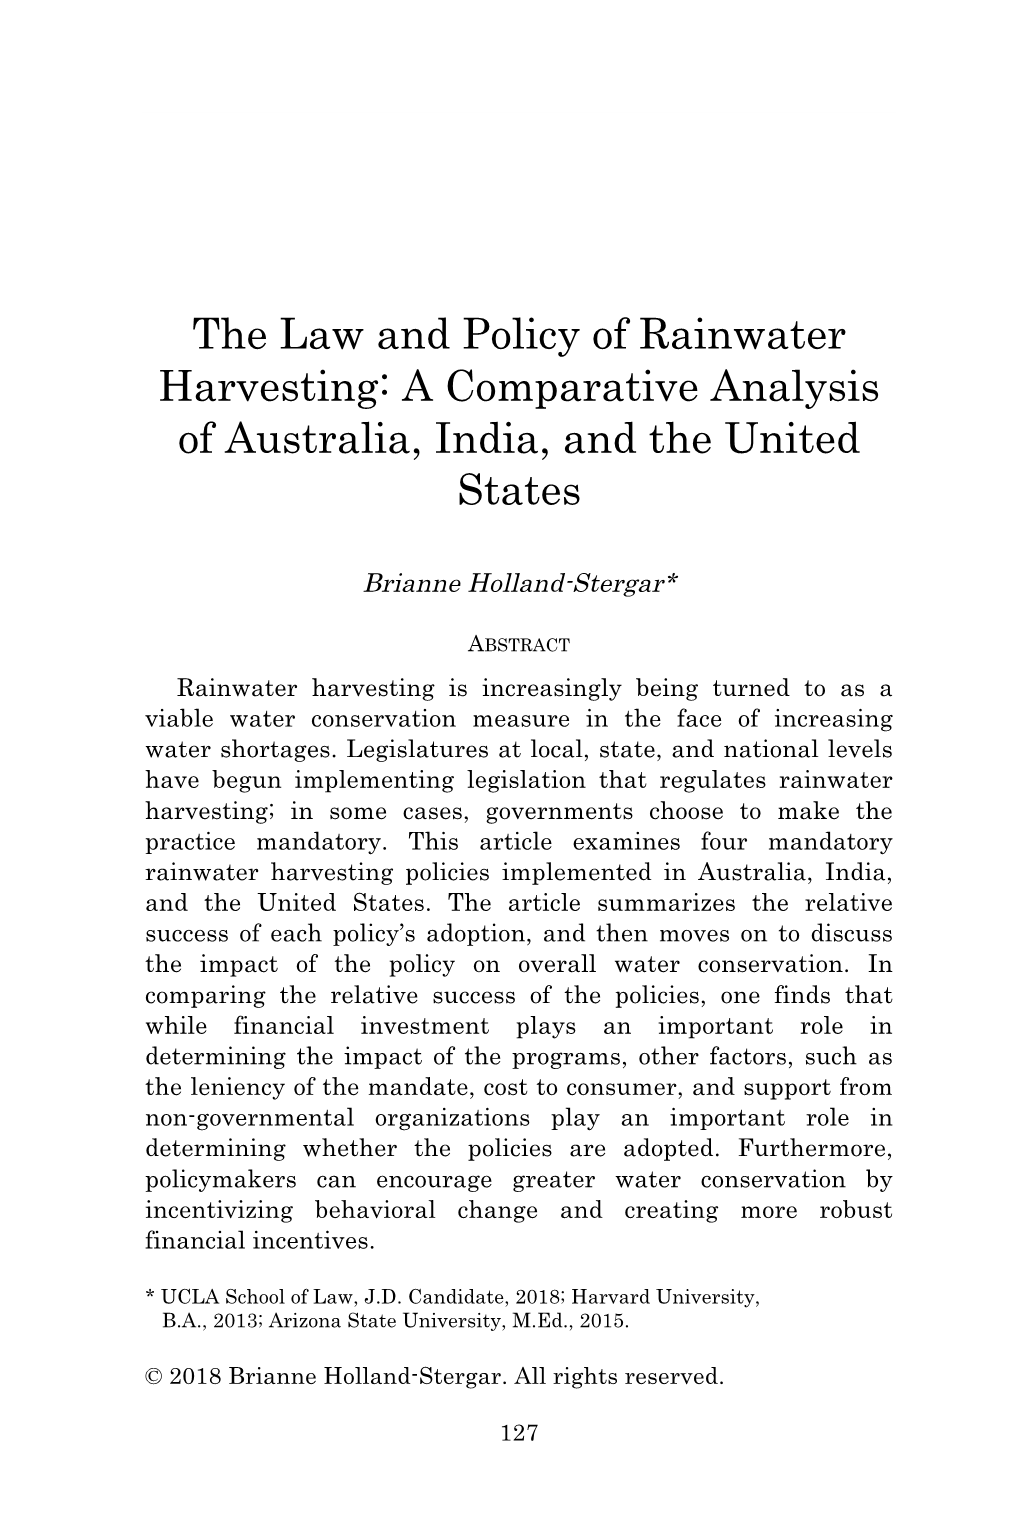 The Law and Policy of Rainwater Harvesting: a Comparative Analysis of Australia, India, and the United States